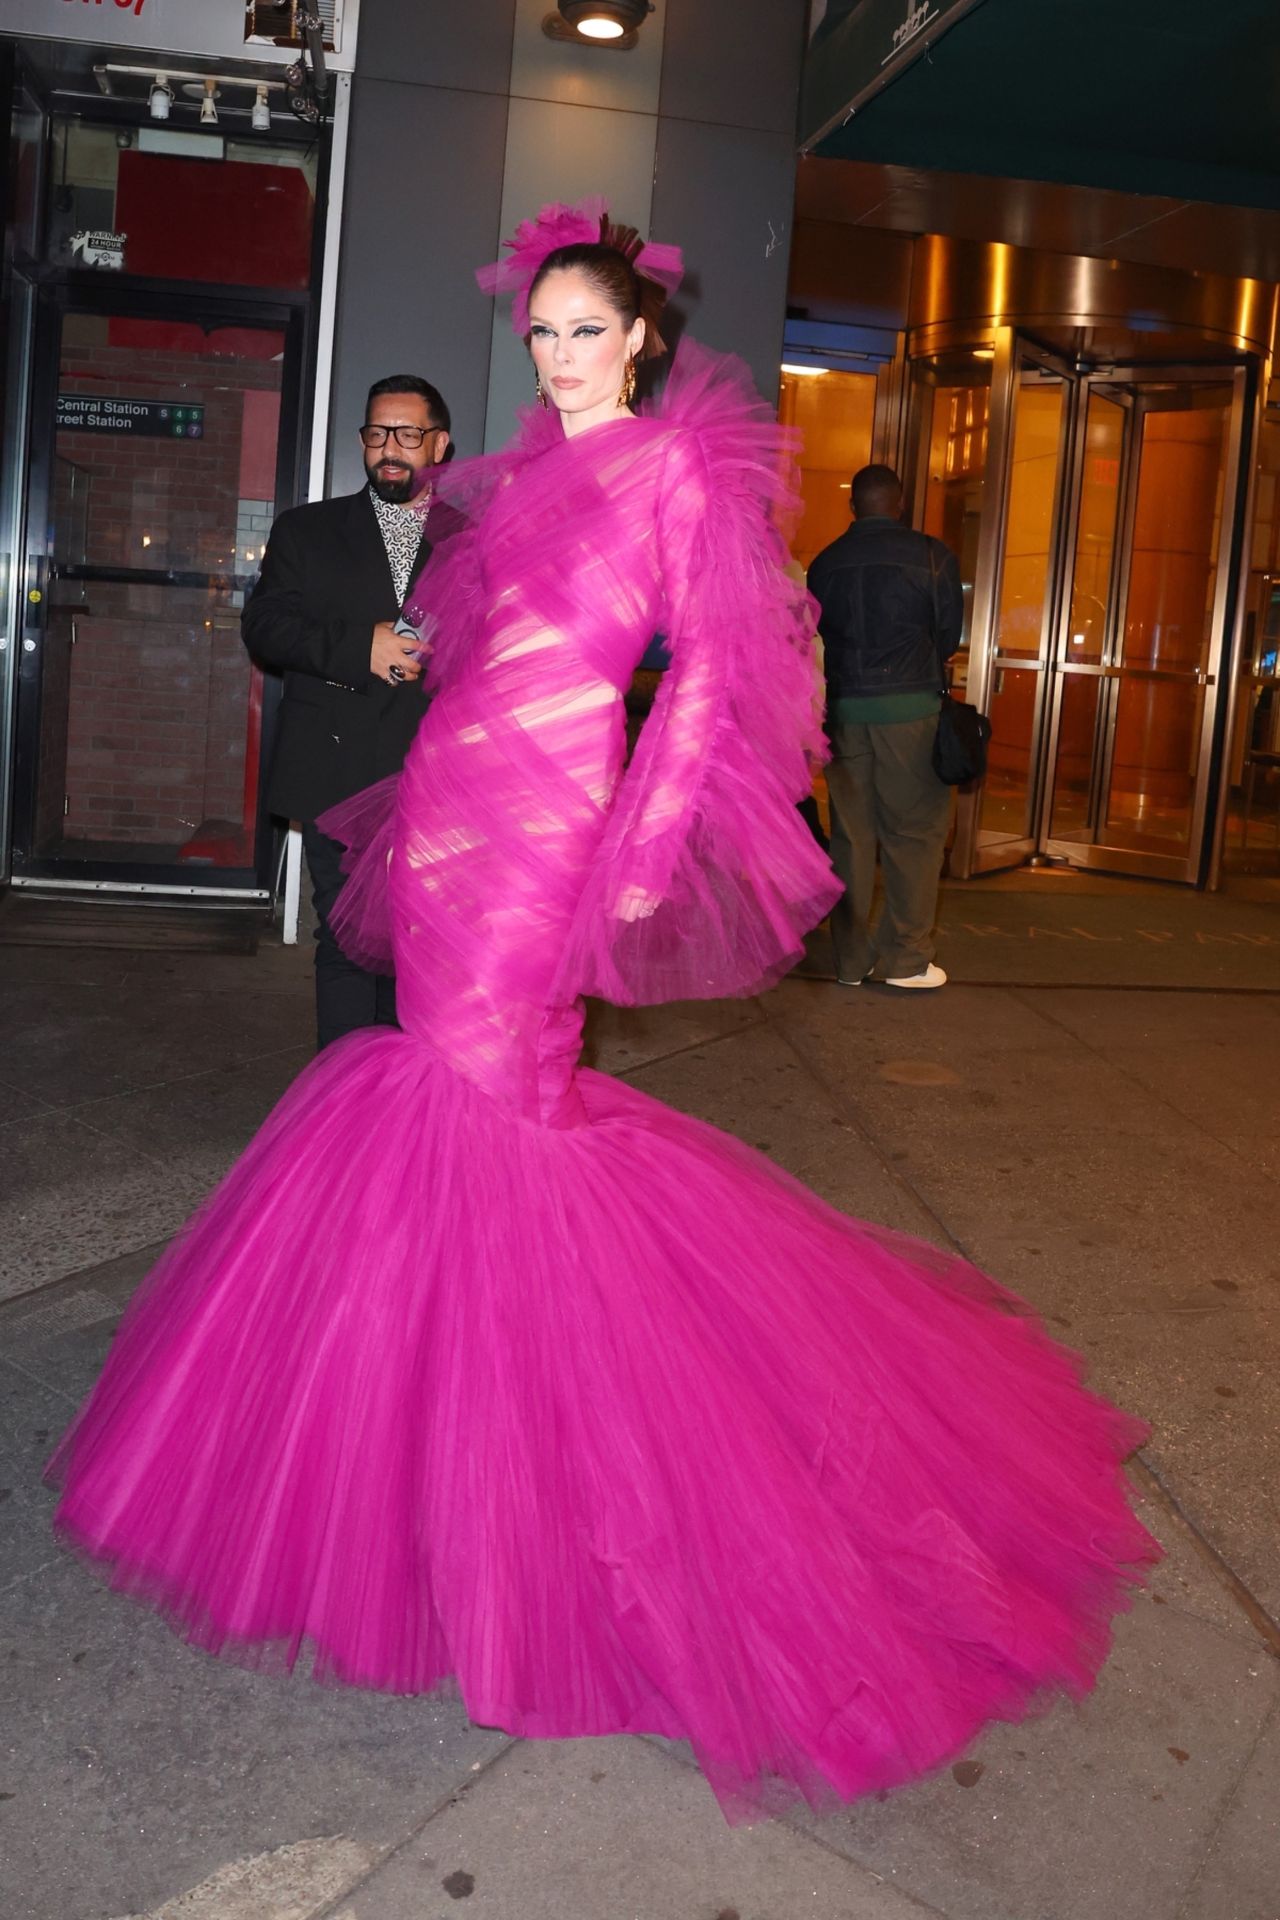 COCO ROCHA AT THE THE MULBERRY BAR FOR A MET GALA AFTER PARTY IN NEW YORK7